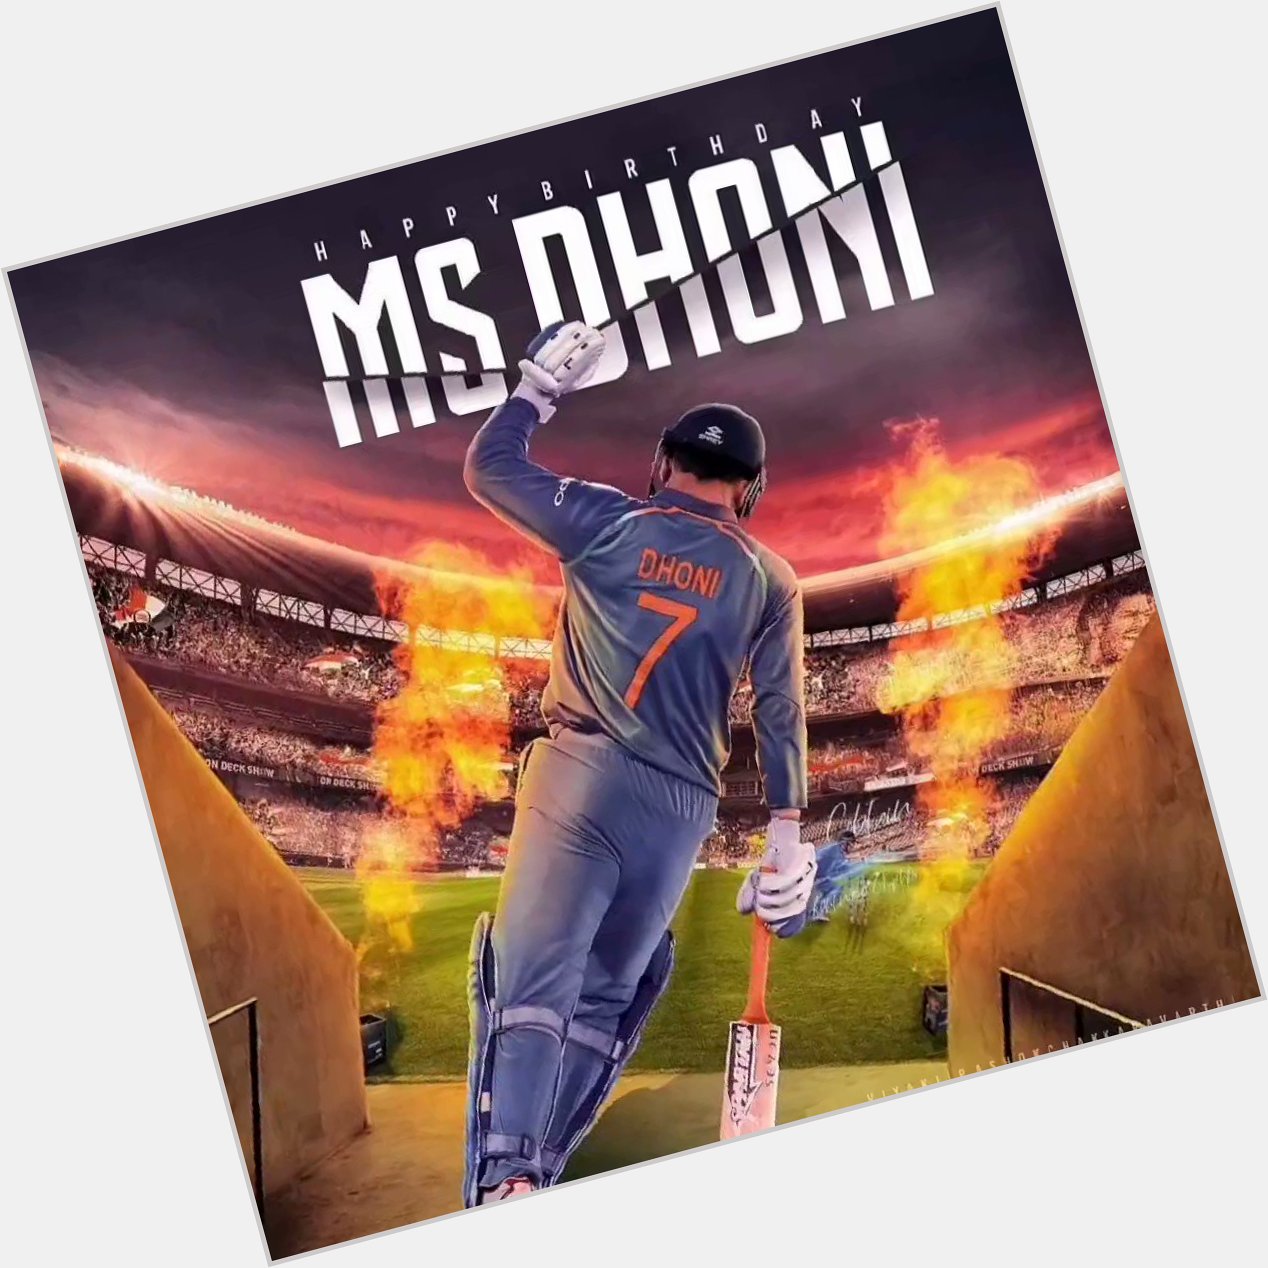 Happy birthday mahendra singh dhoni. The best player the game had ever produced 